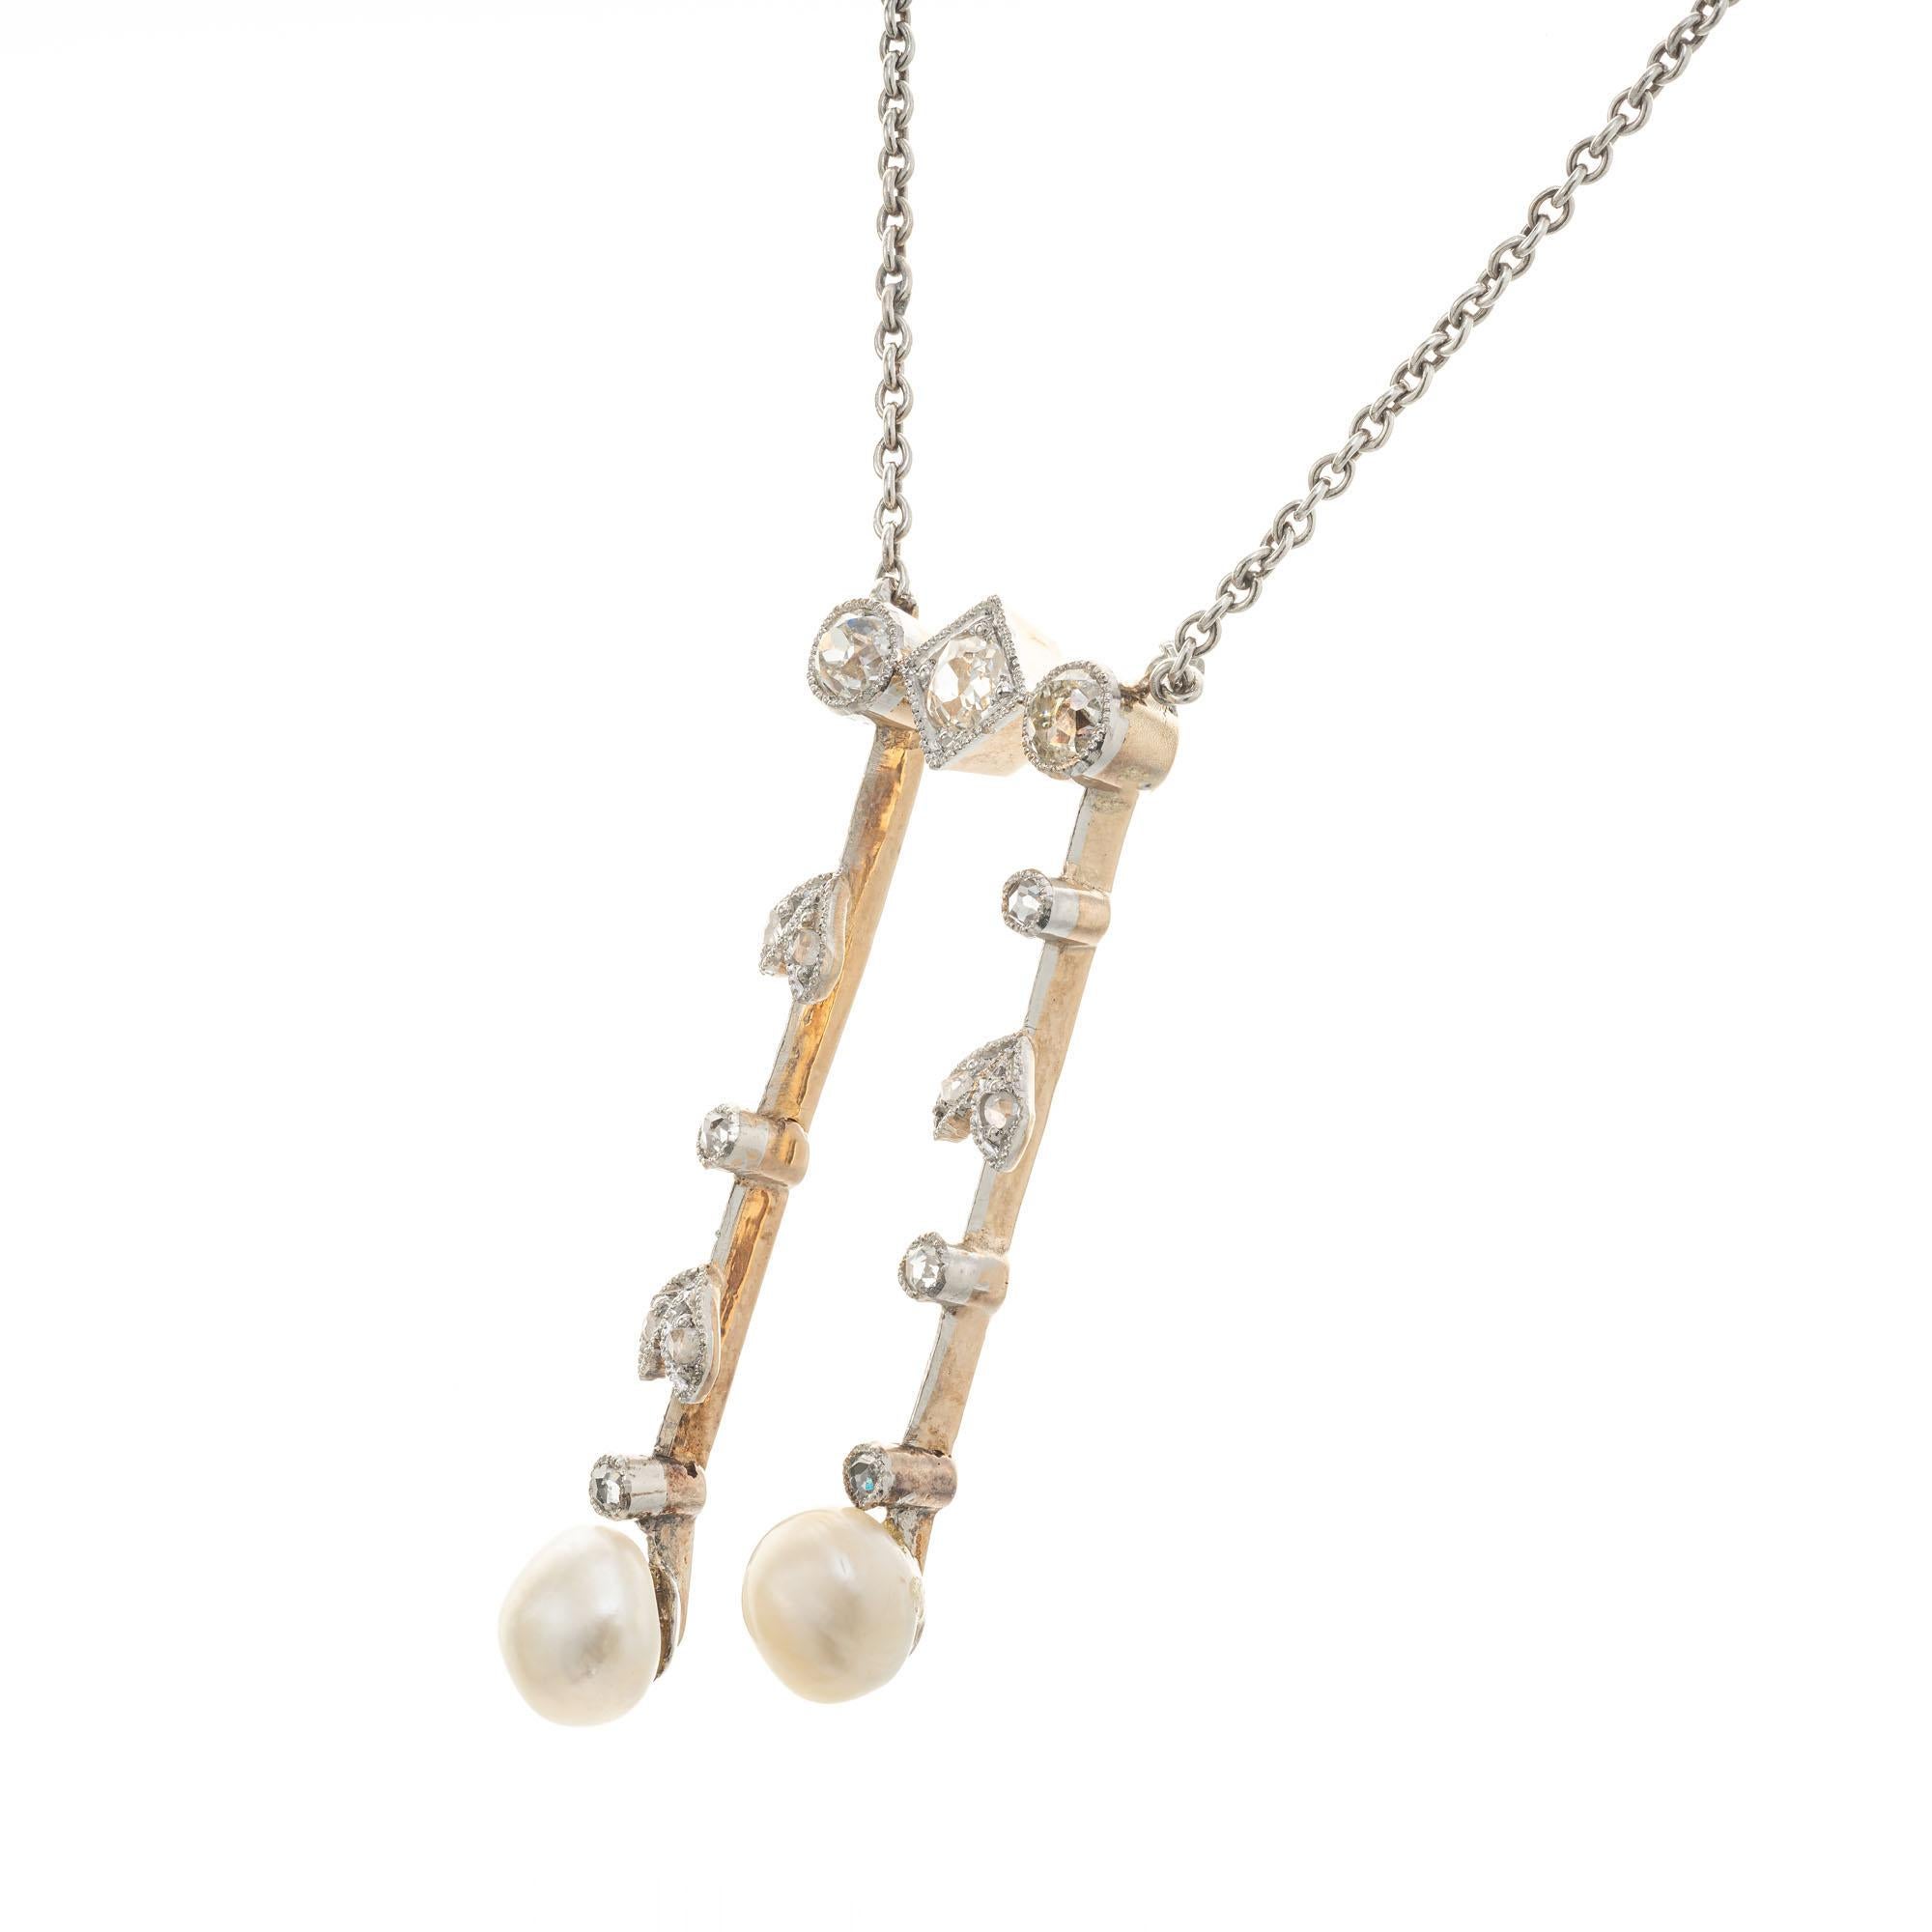 Victorian silver topped 14k gold double dangle diamond and natural pearl drop pendant necklace. The 15.75 inch chain and catch are white gold. All original old mine and rose cut diamonds. Both pearls are GIA certified as natural pearls, saltwater,